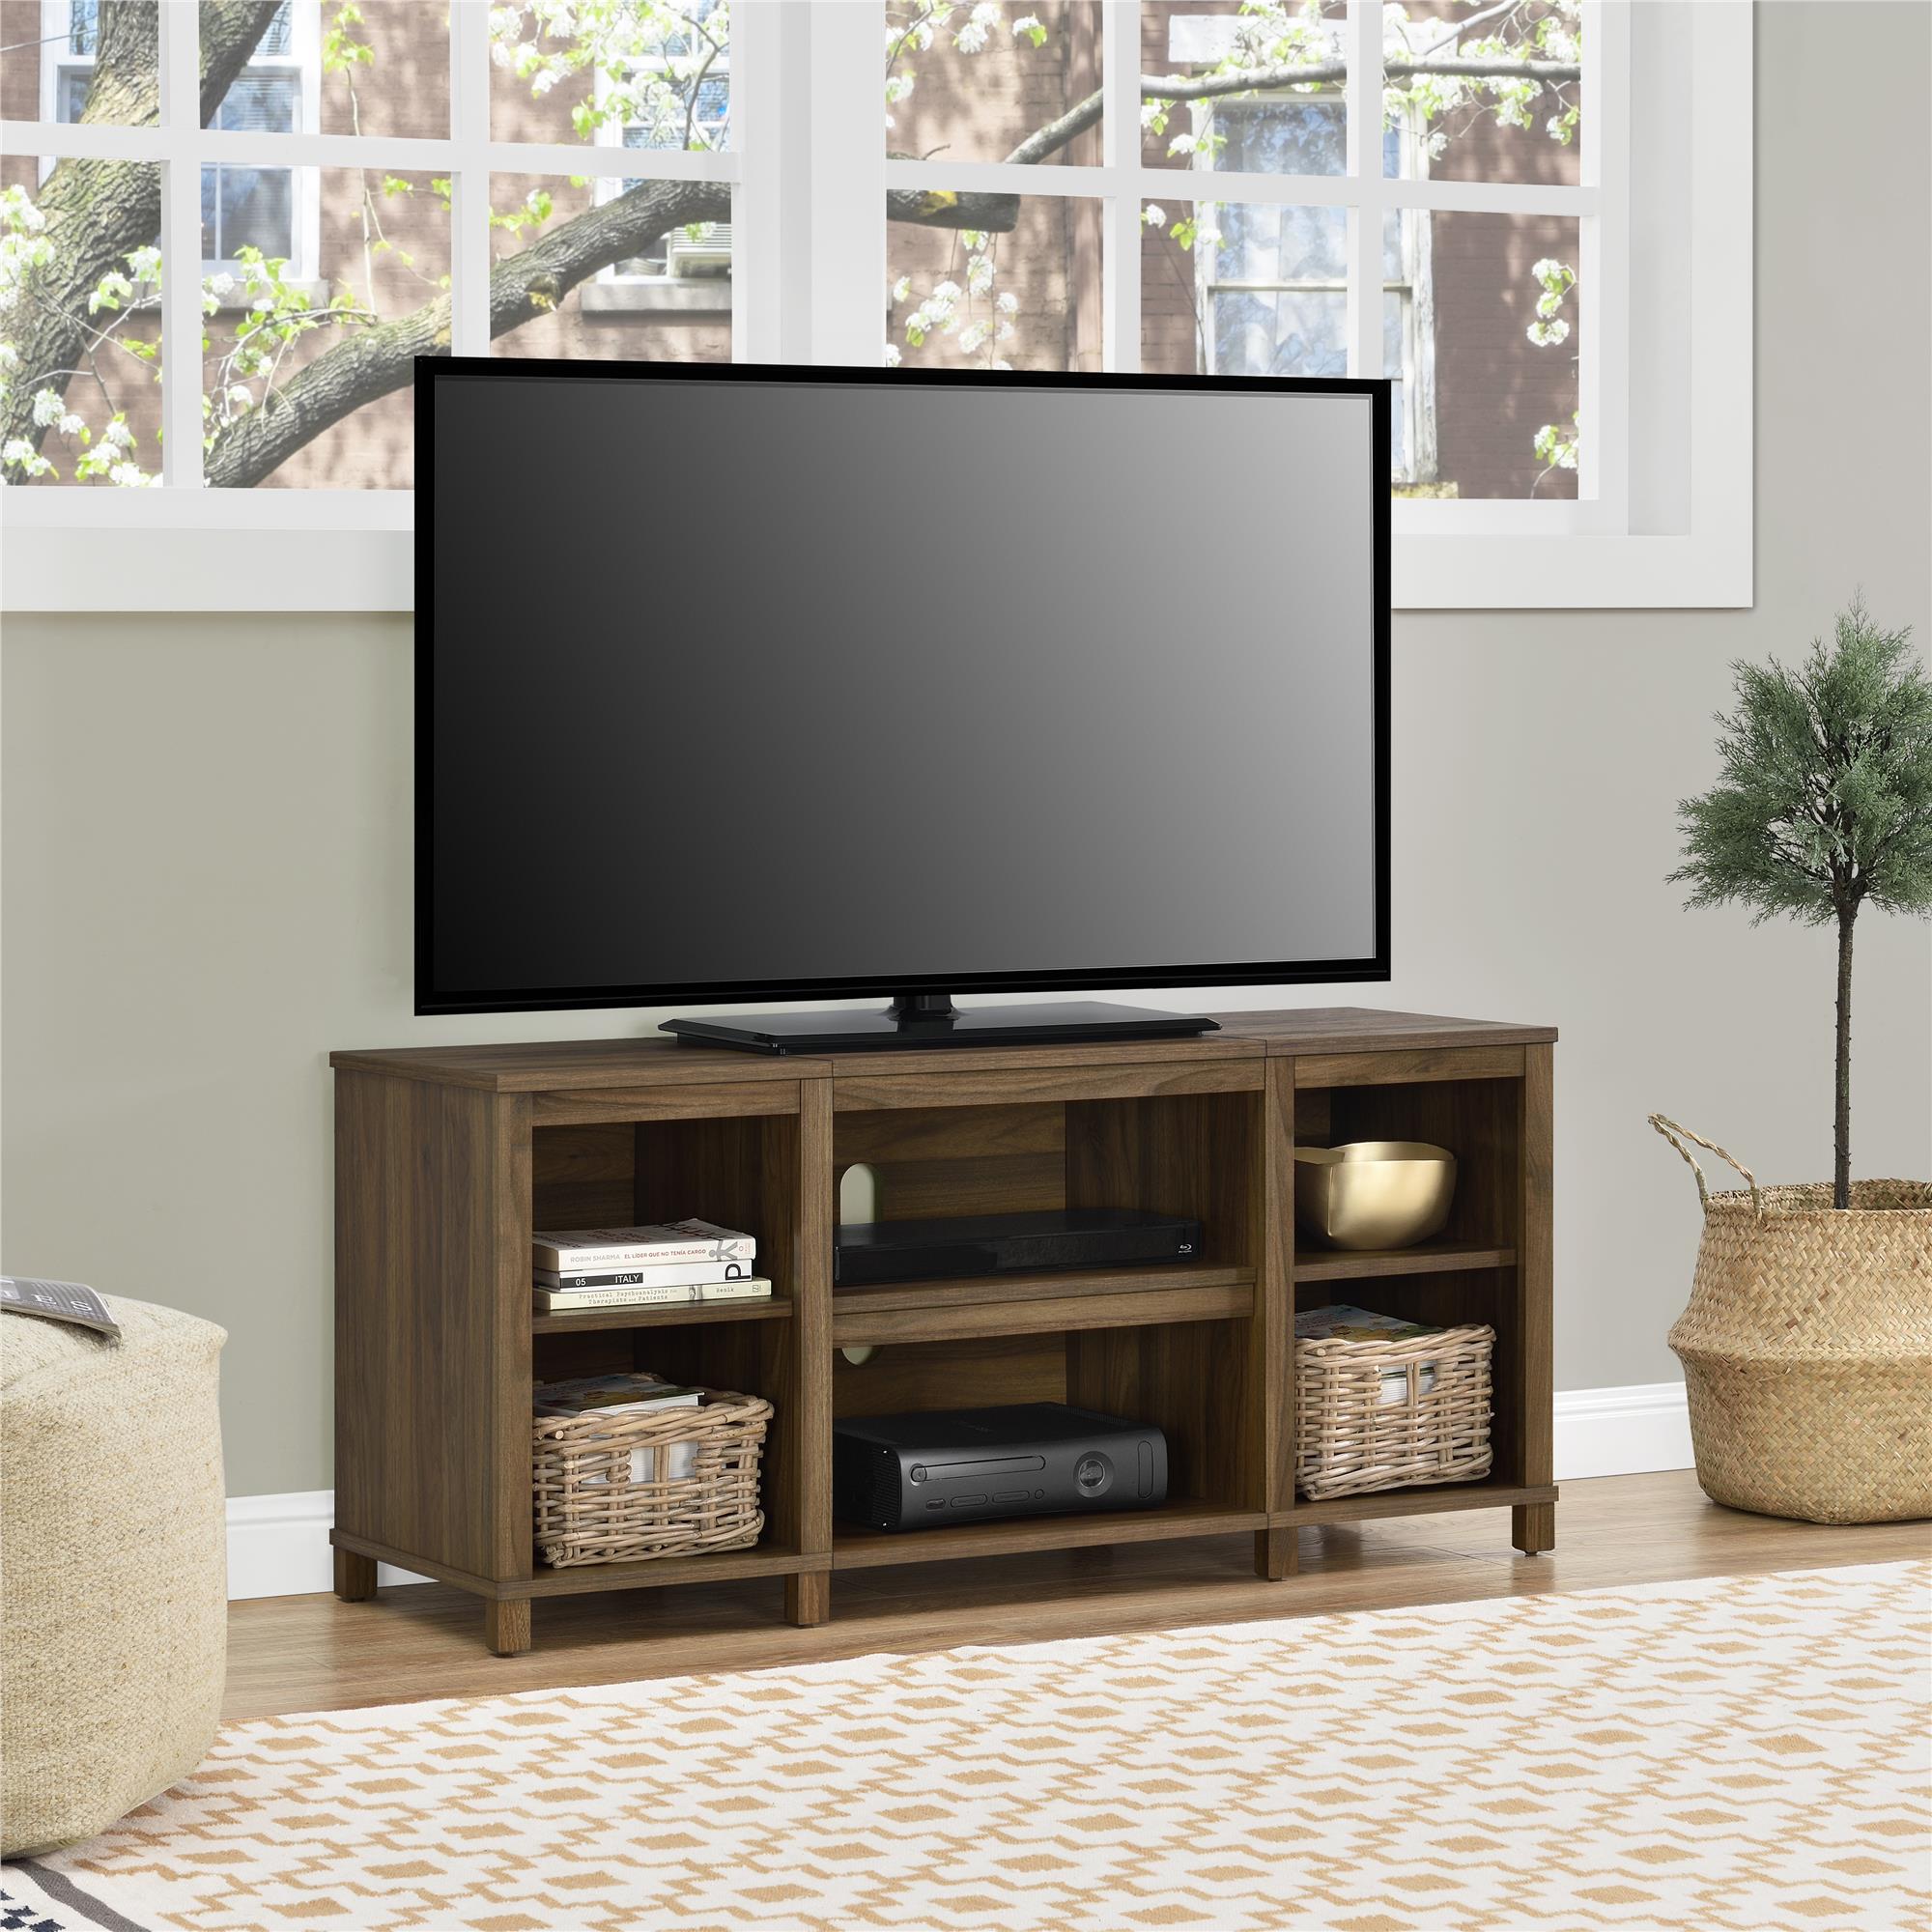 Mainstays Parsons TV Stand for TVs up to 50", Canyon Walnut - image 4 of 15